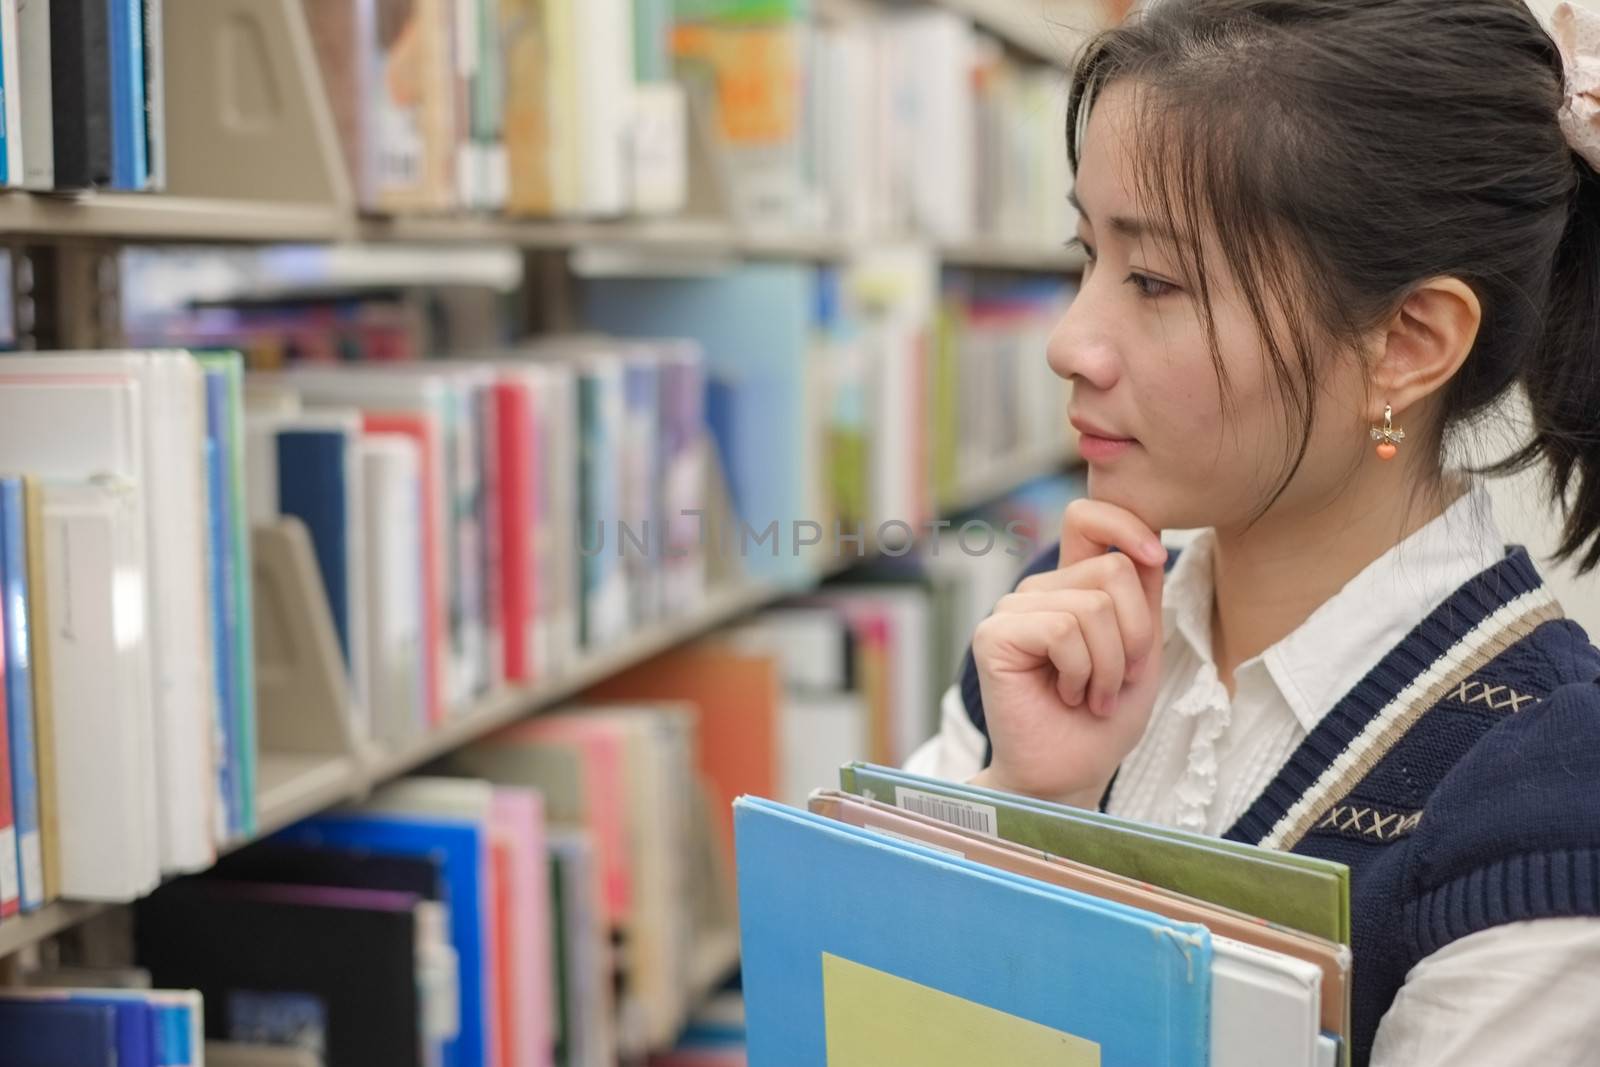 Cute young woman holding books and looking at a library bookshelf thoughtfully